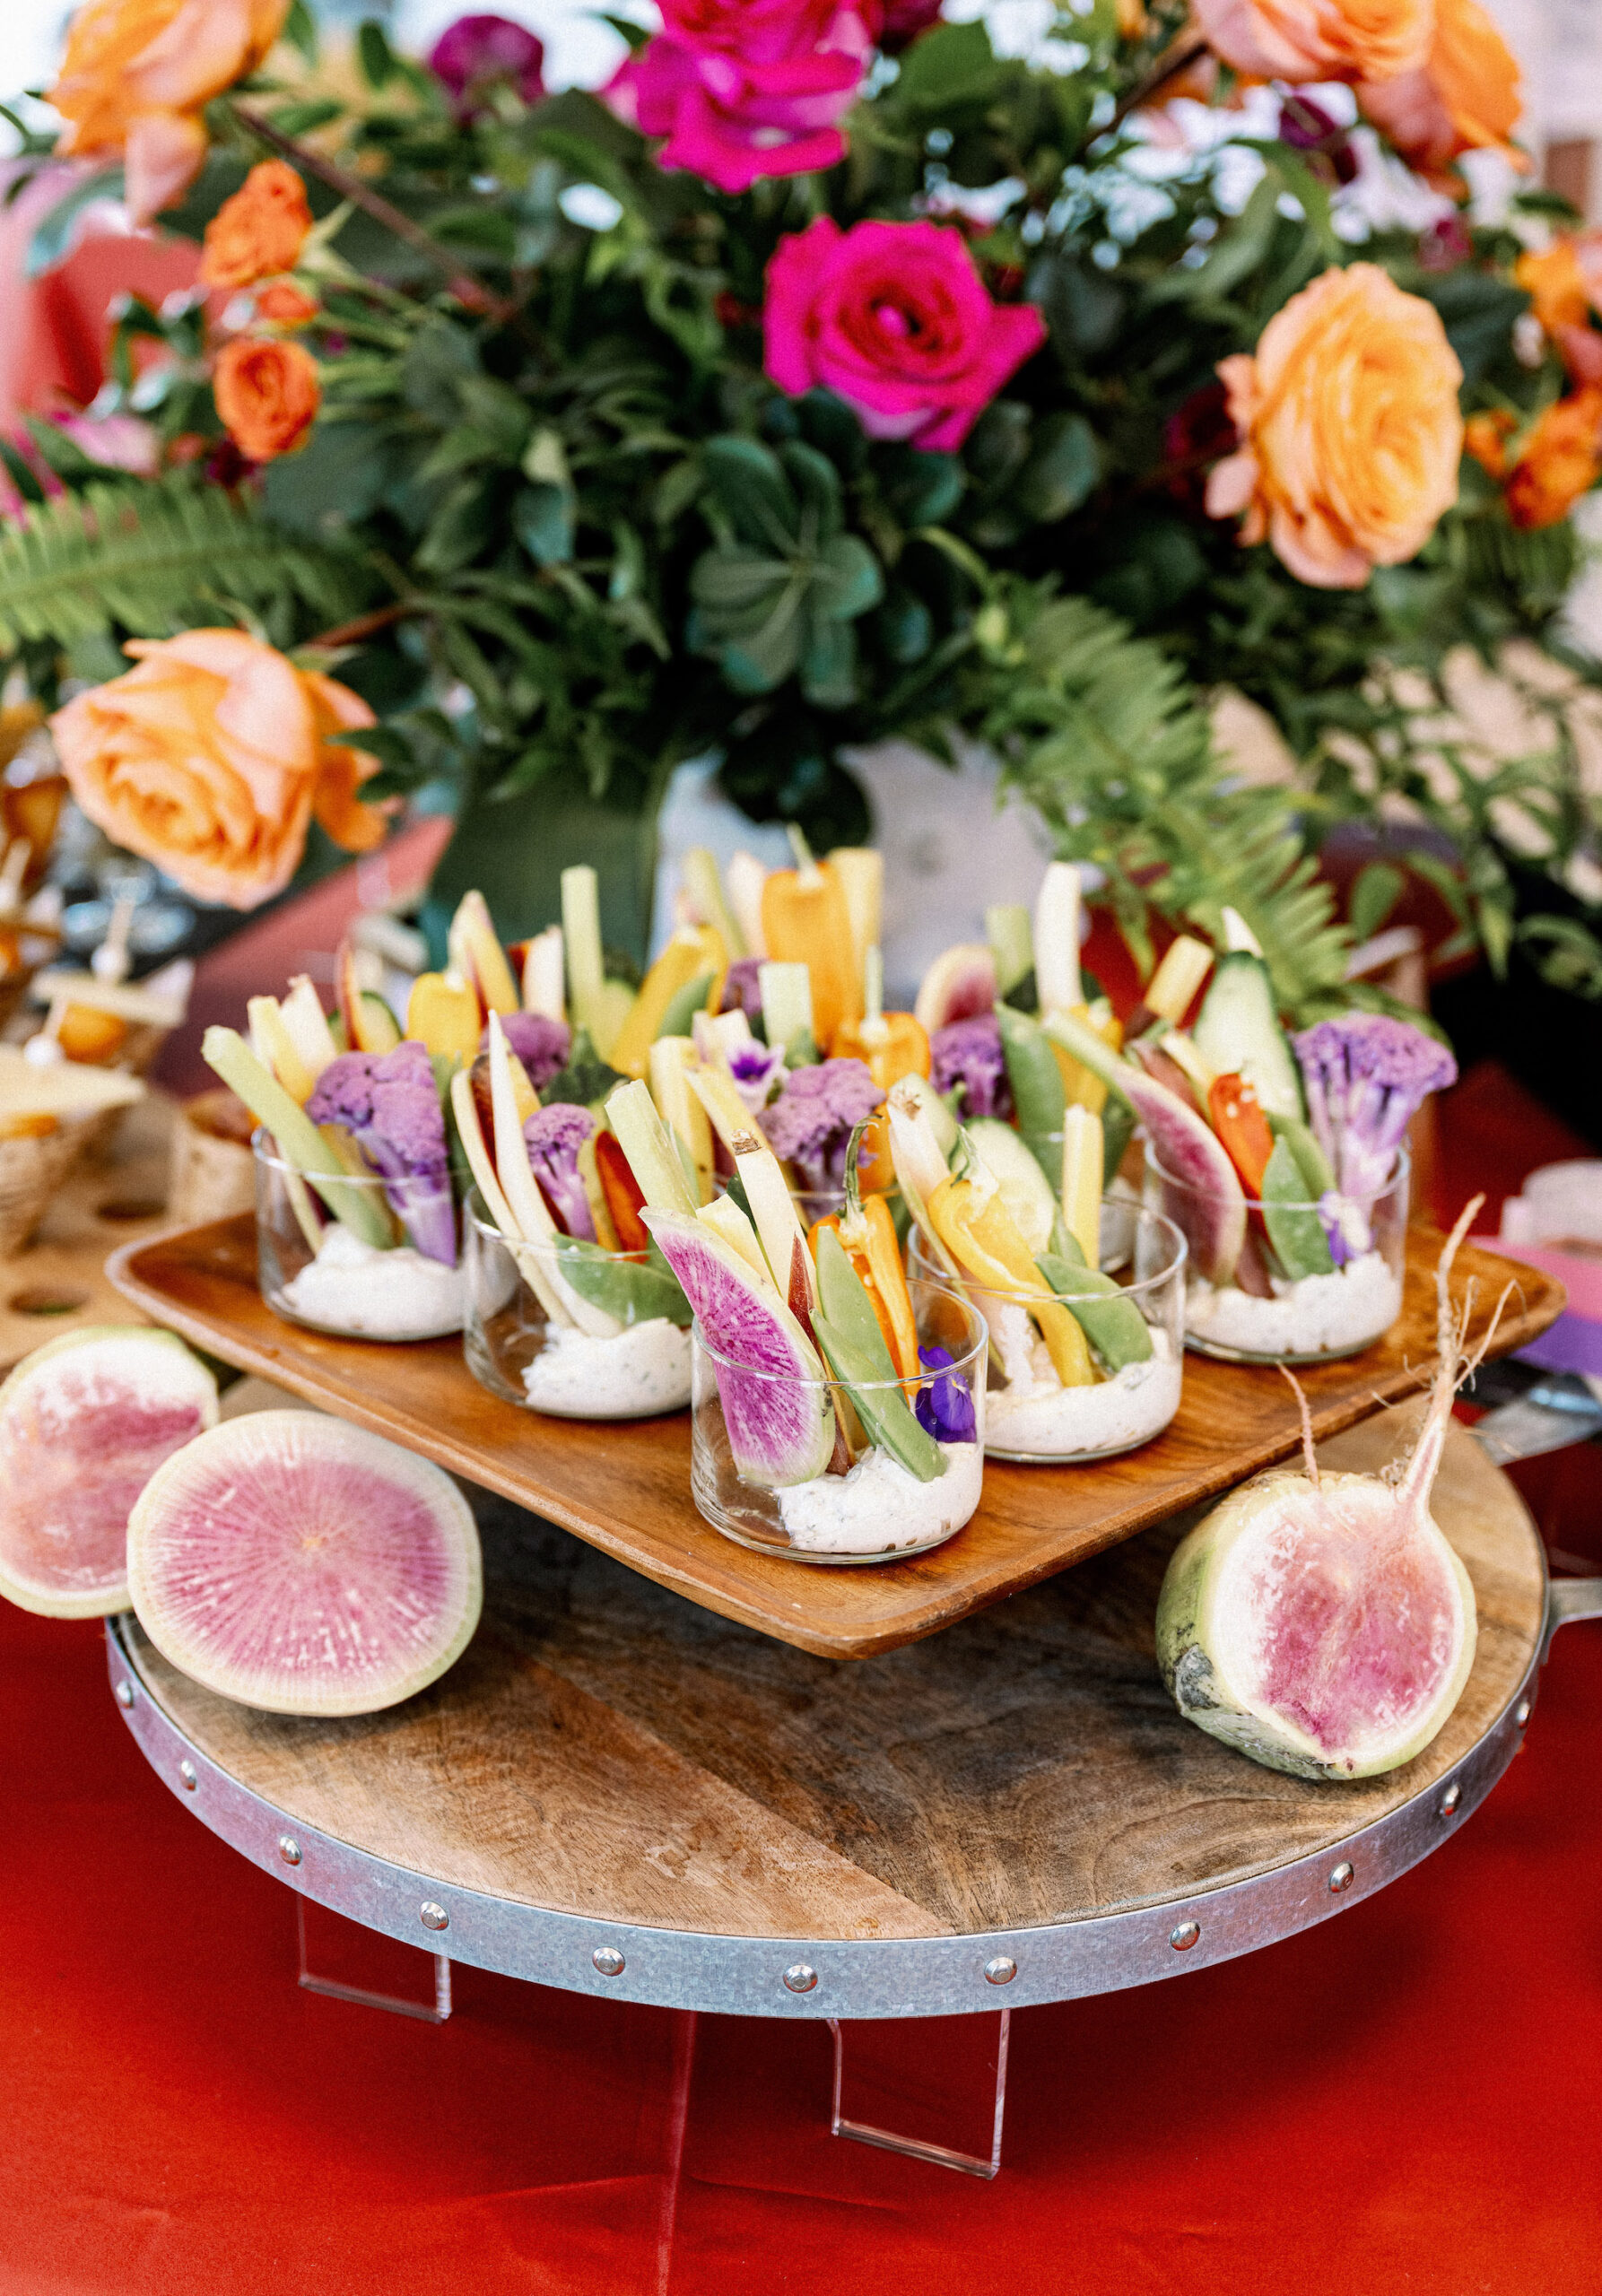 Tampa Bay Catering Company Elite Events Catering | Dewitt for Love Photography | Farm Fresh Veggie Crudite Cups with Lebanese Style Labneh